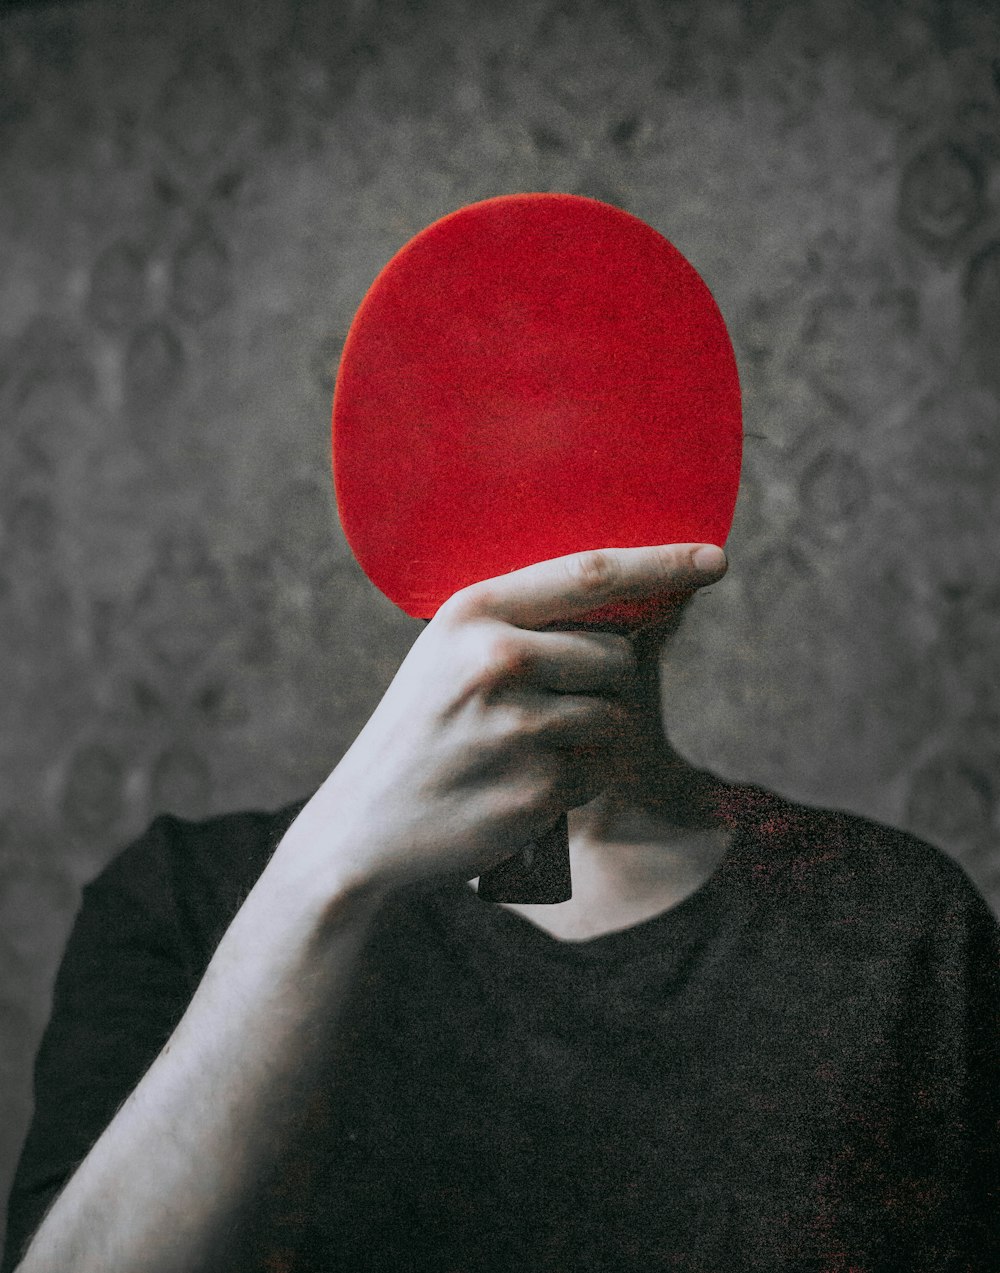 a person holding a red ping pong paddle up to their face